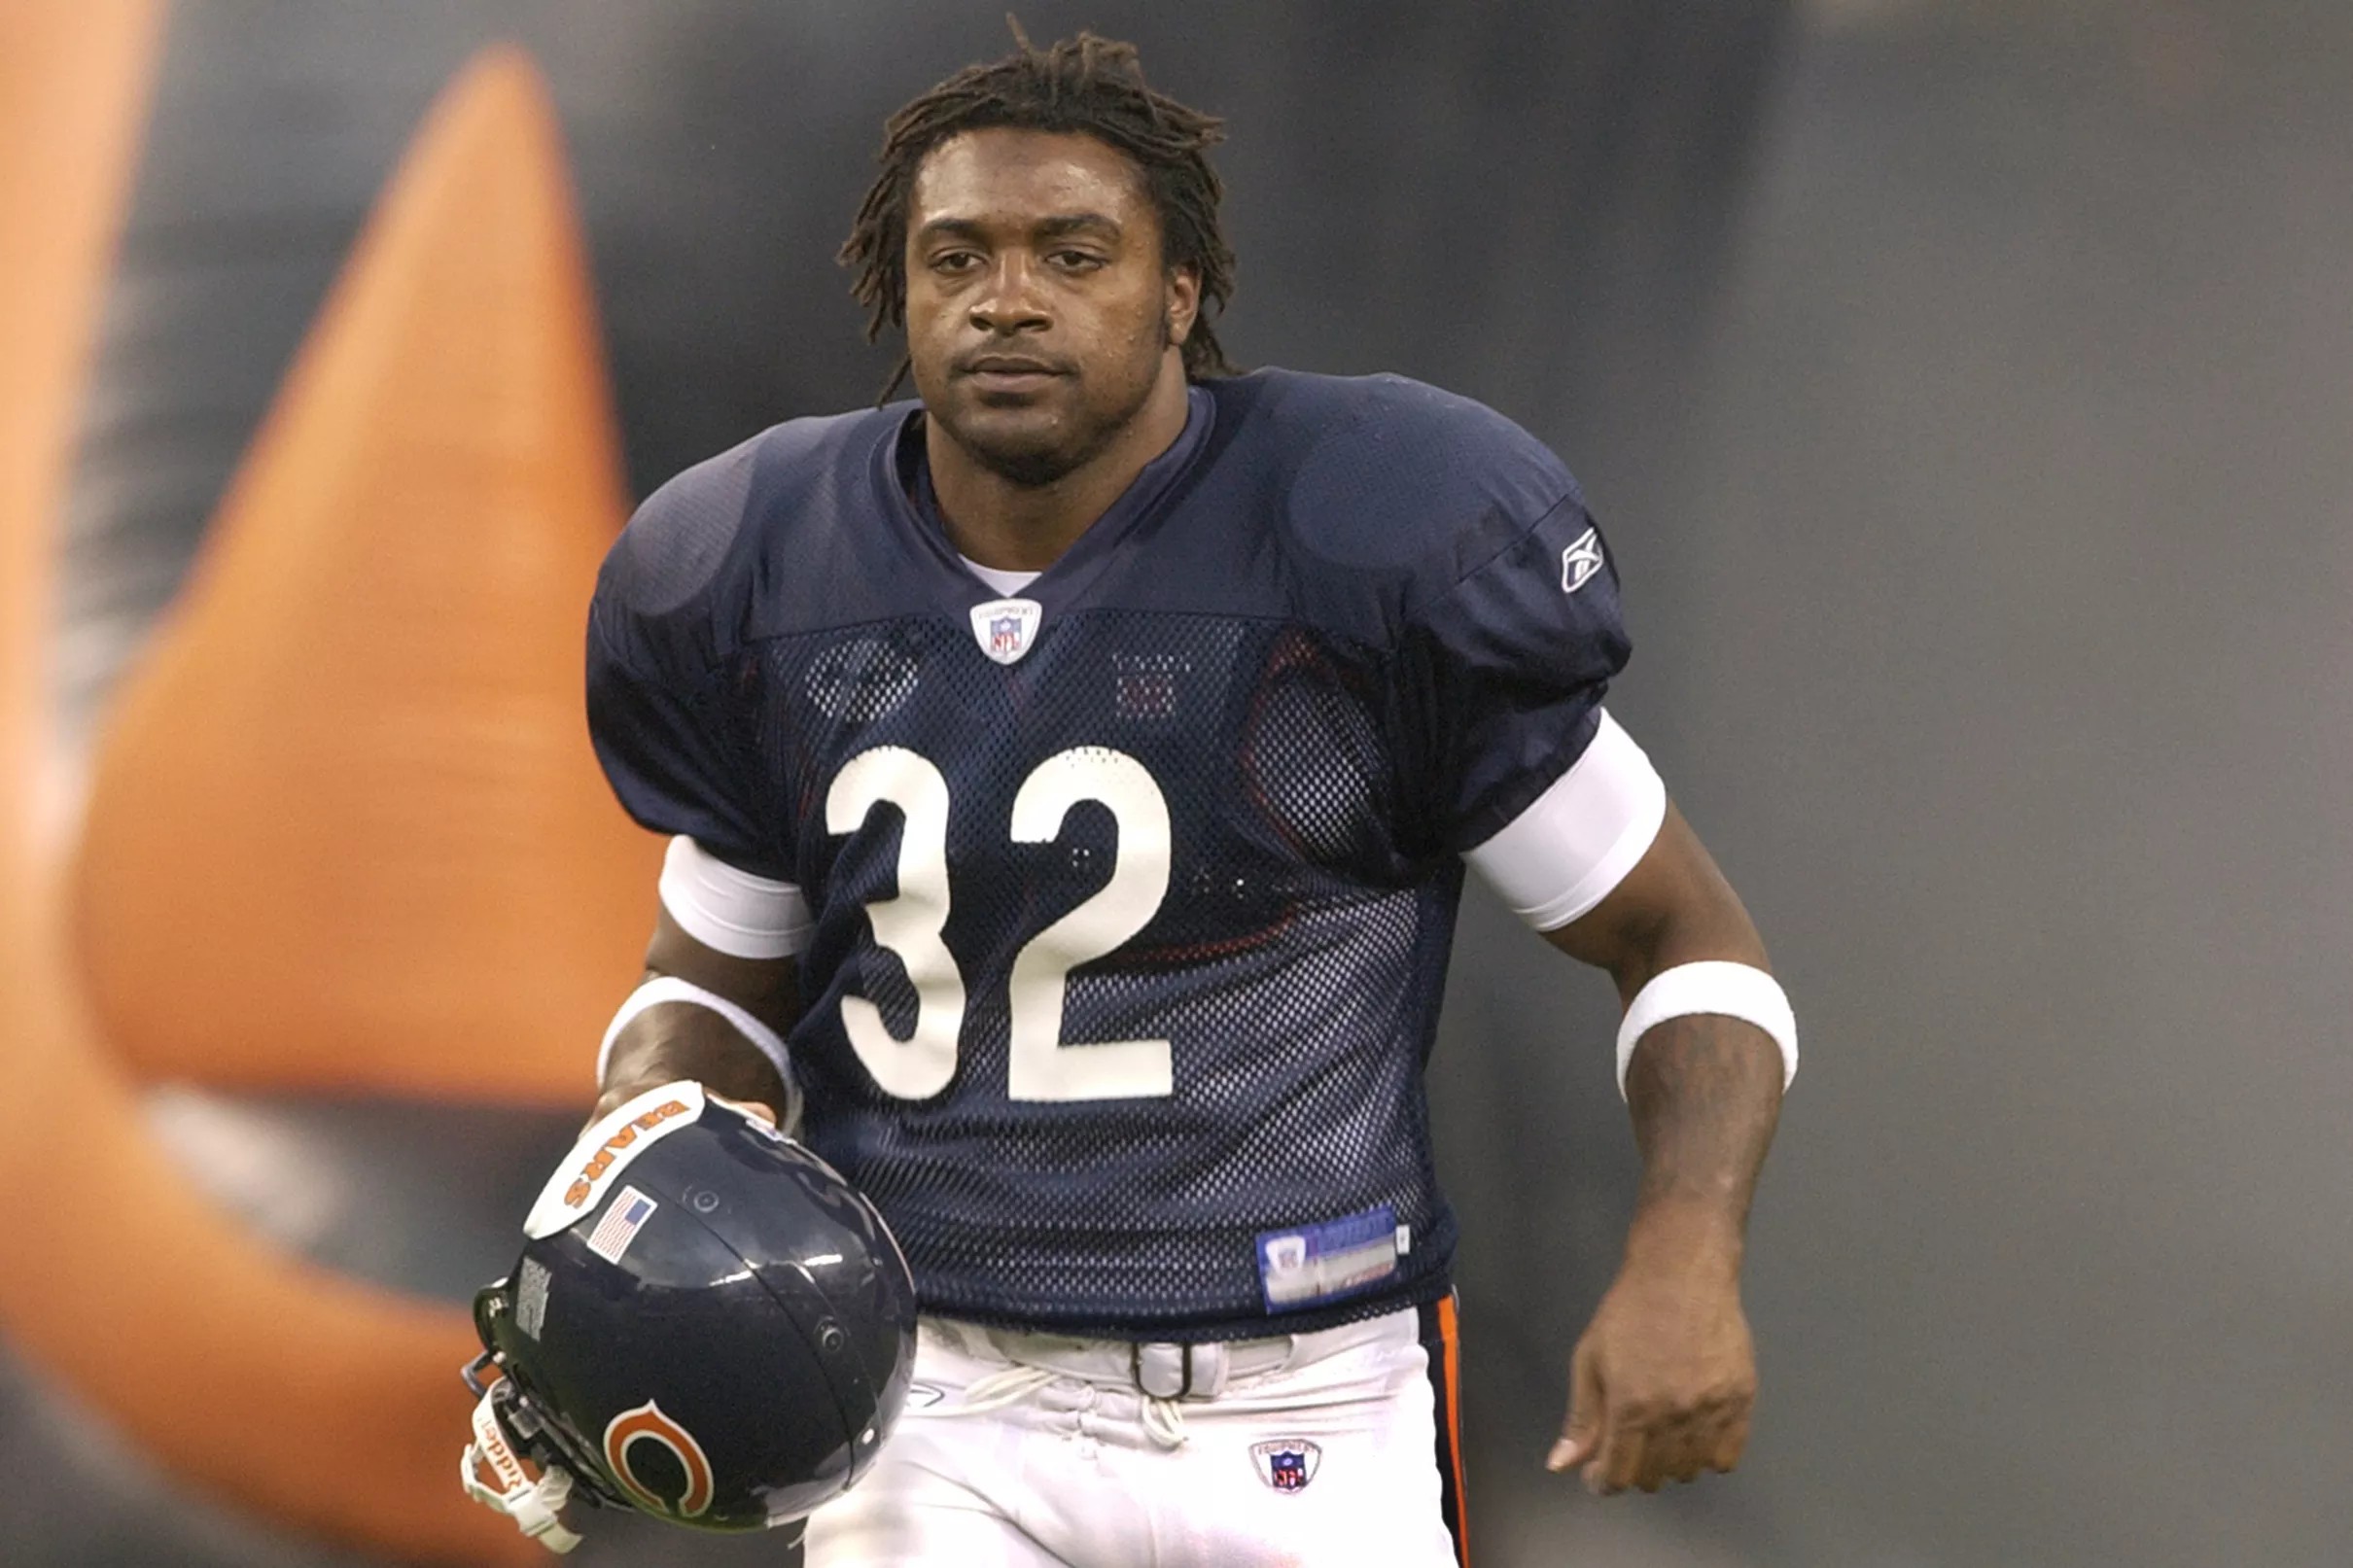 Former Bears RB Cedric Benson dies in motorcycle accident: report